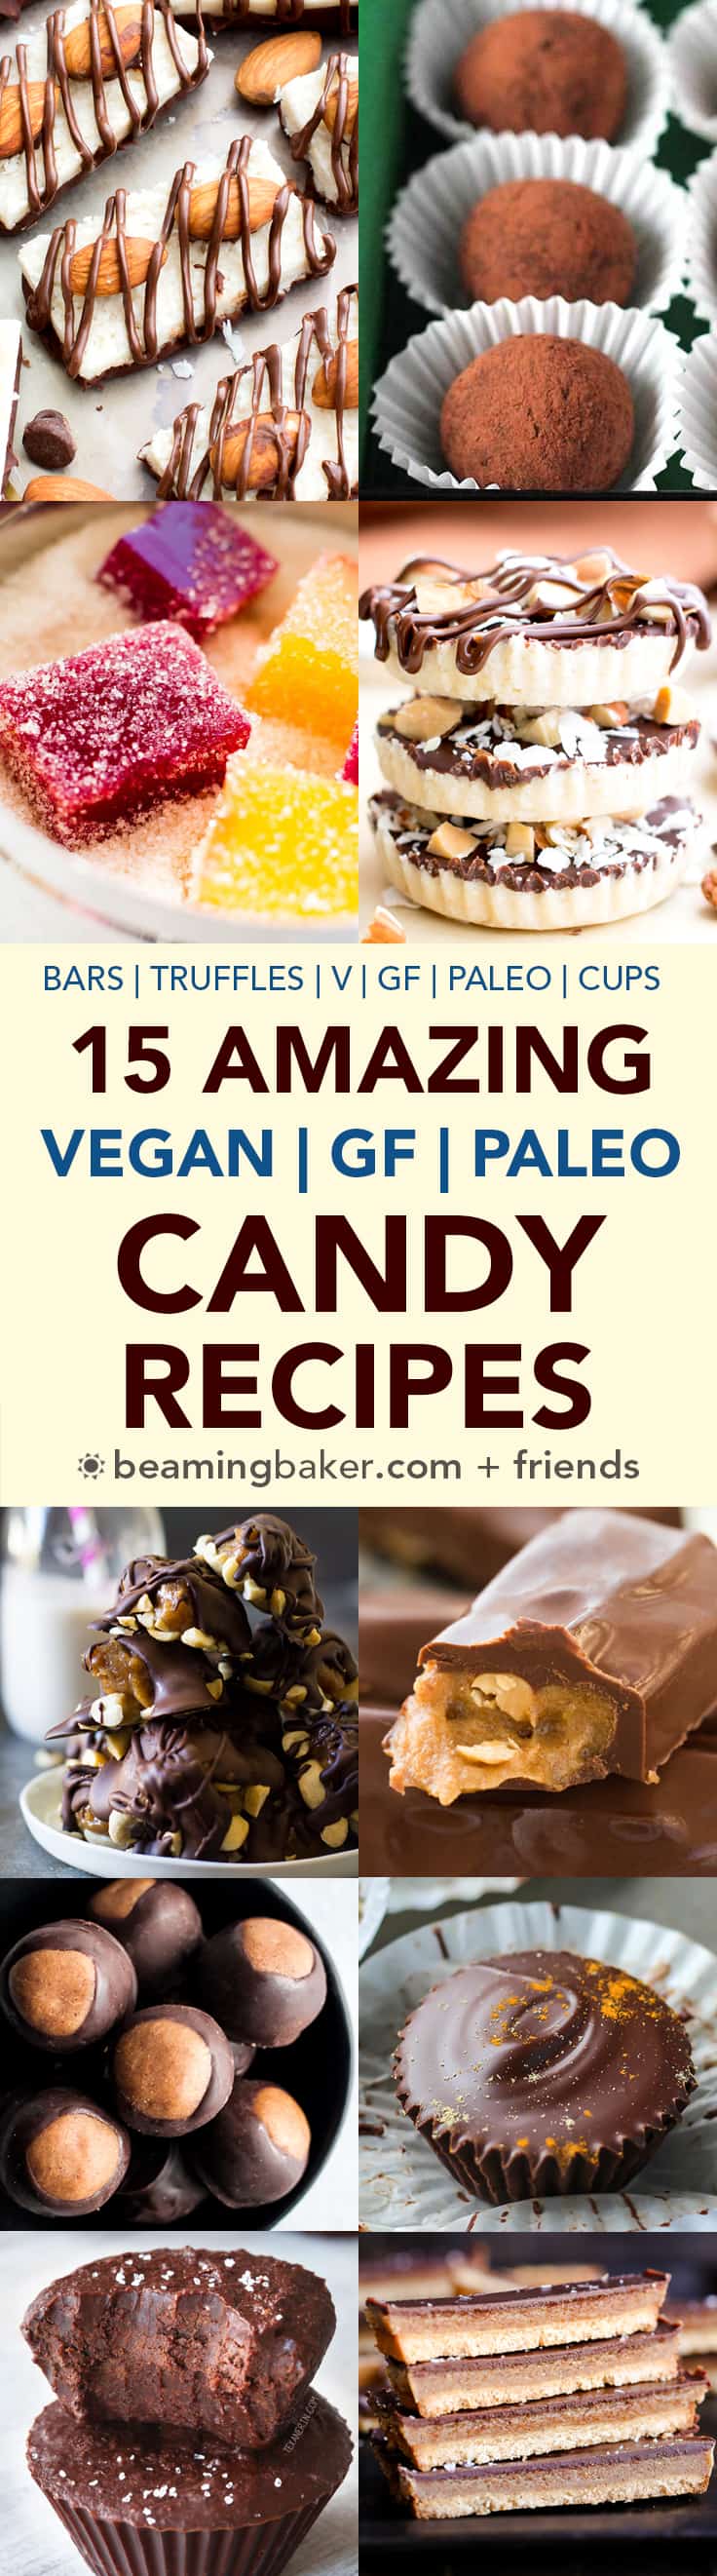 15 Amazing Paleo Gluten Free Vegan Candy Recipes: a sweet collection of 15 easy recipes for paleo, vegan, gluten-free recipes made with simple ingredients! #Paleo #Vegan #GlutenFree #DairyFree | BeamingBaker.com